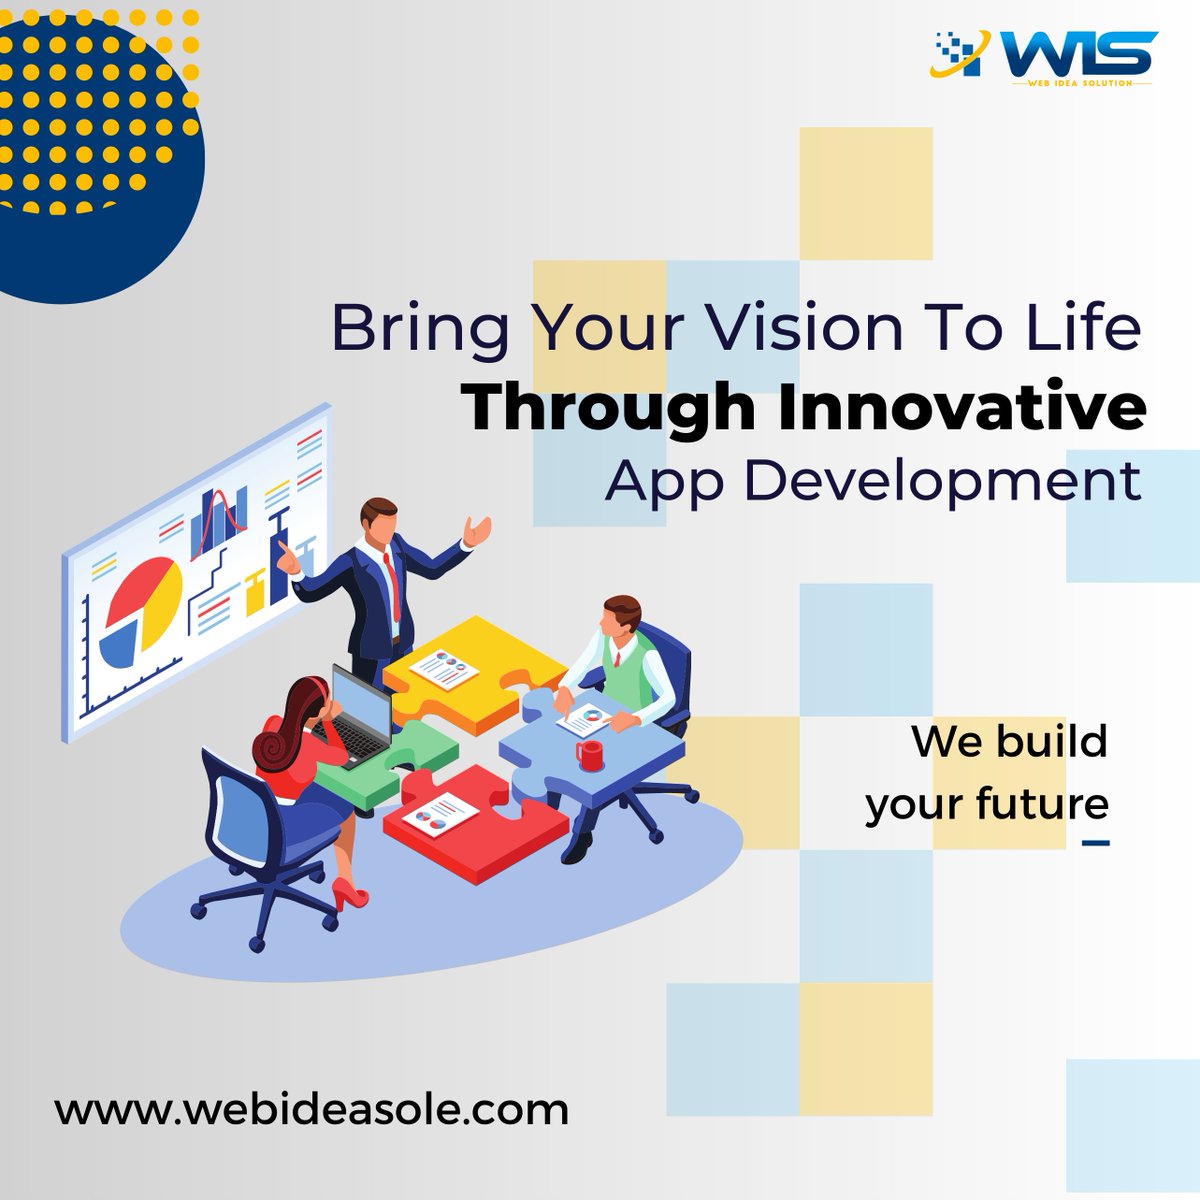 Are you ready to take your business to the next level? 💼✨ At Web Idea Solution, we bring your vision to life through innovative app development. 🌟📲

Let's transform your business together! 

Visit: webideasole.com/app-developmen…

#appdevelopment #appbuilder #applicationdevelopment